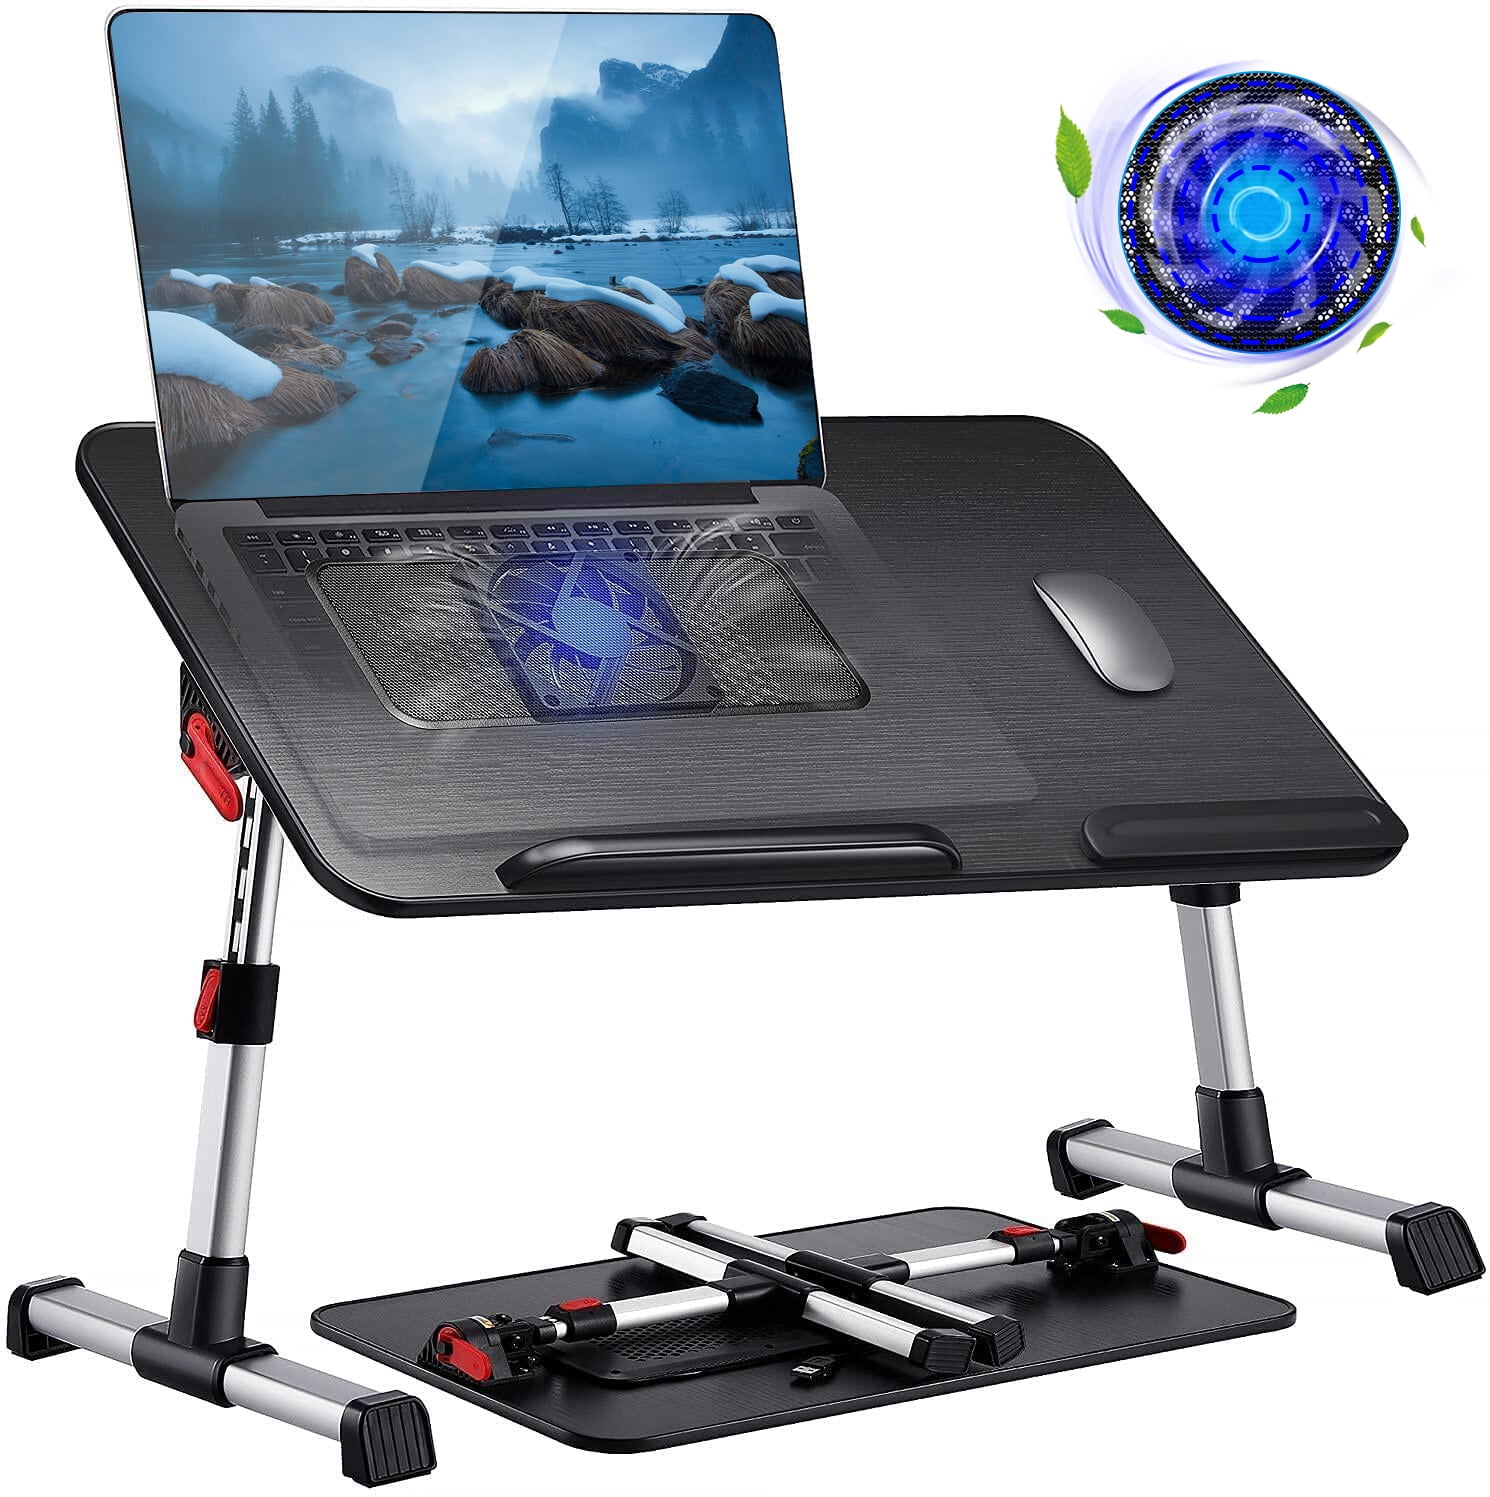 Adjustable Folding Laptop Table Desk Bed Sofa Computer Tray Stand Portable Black